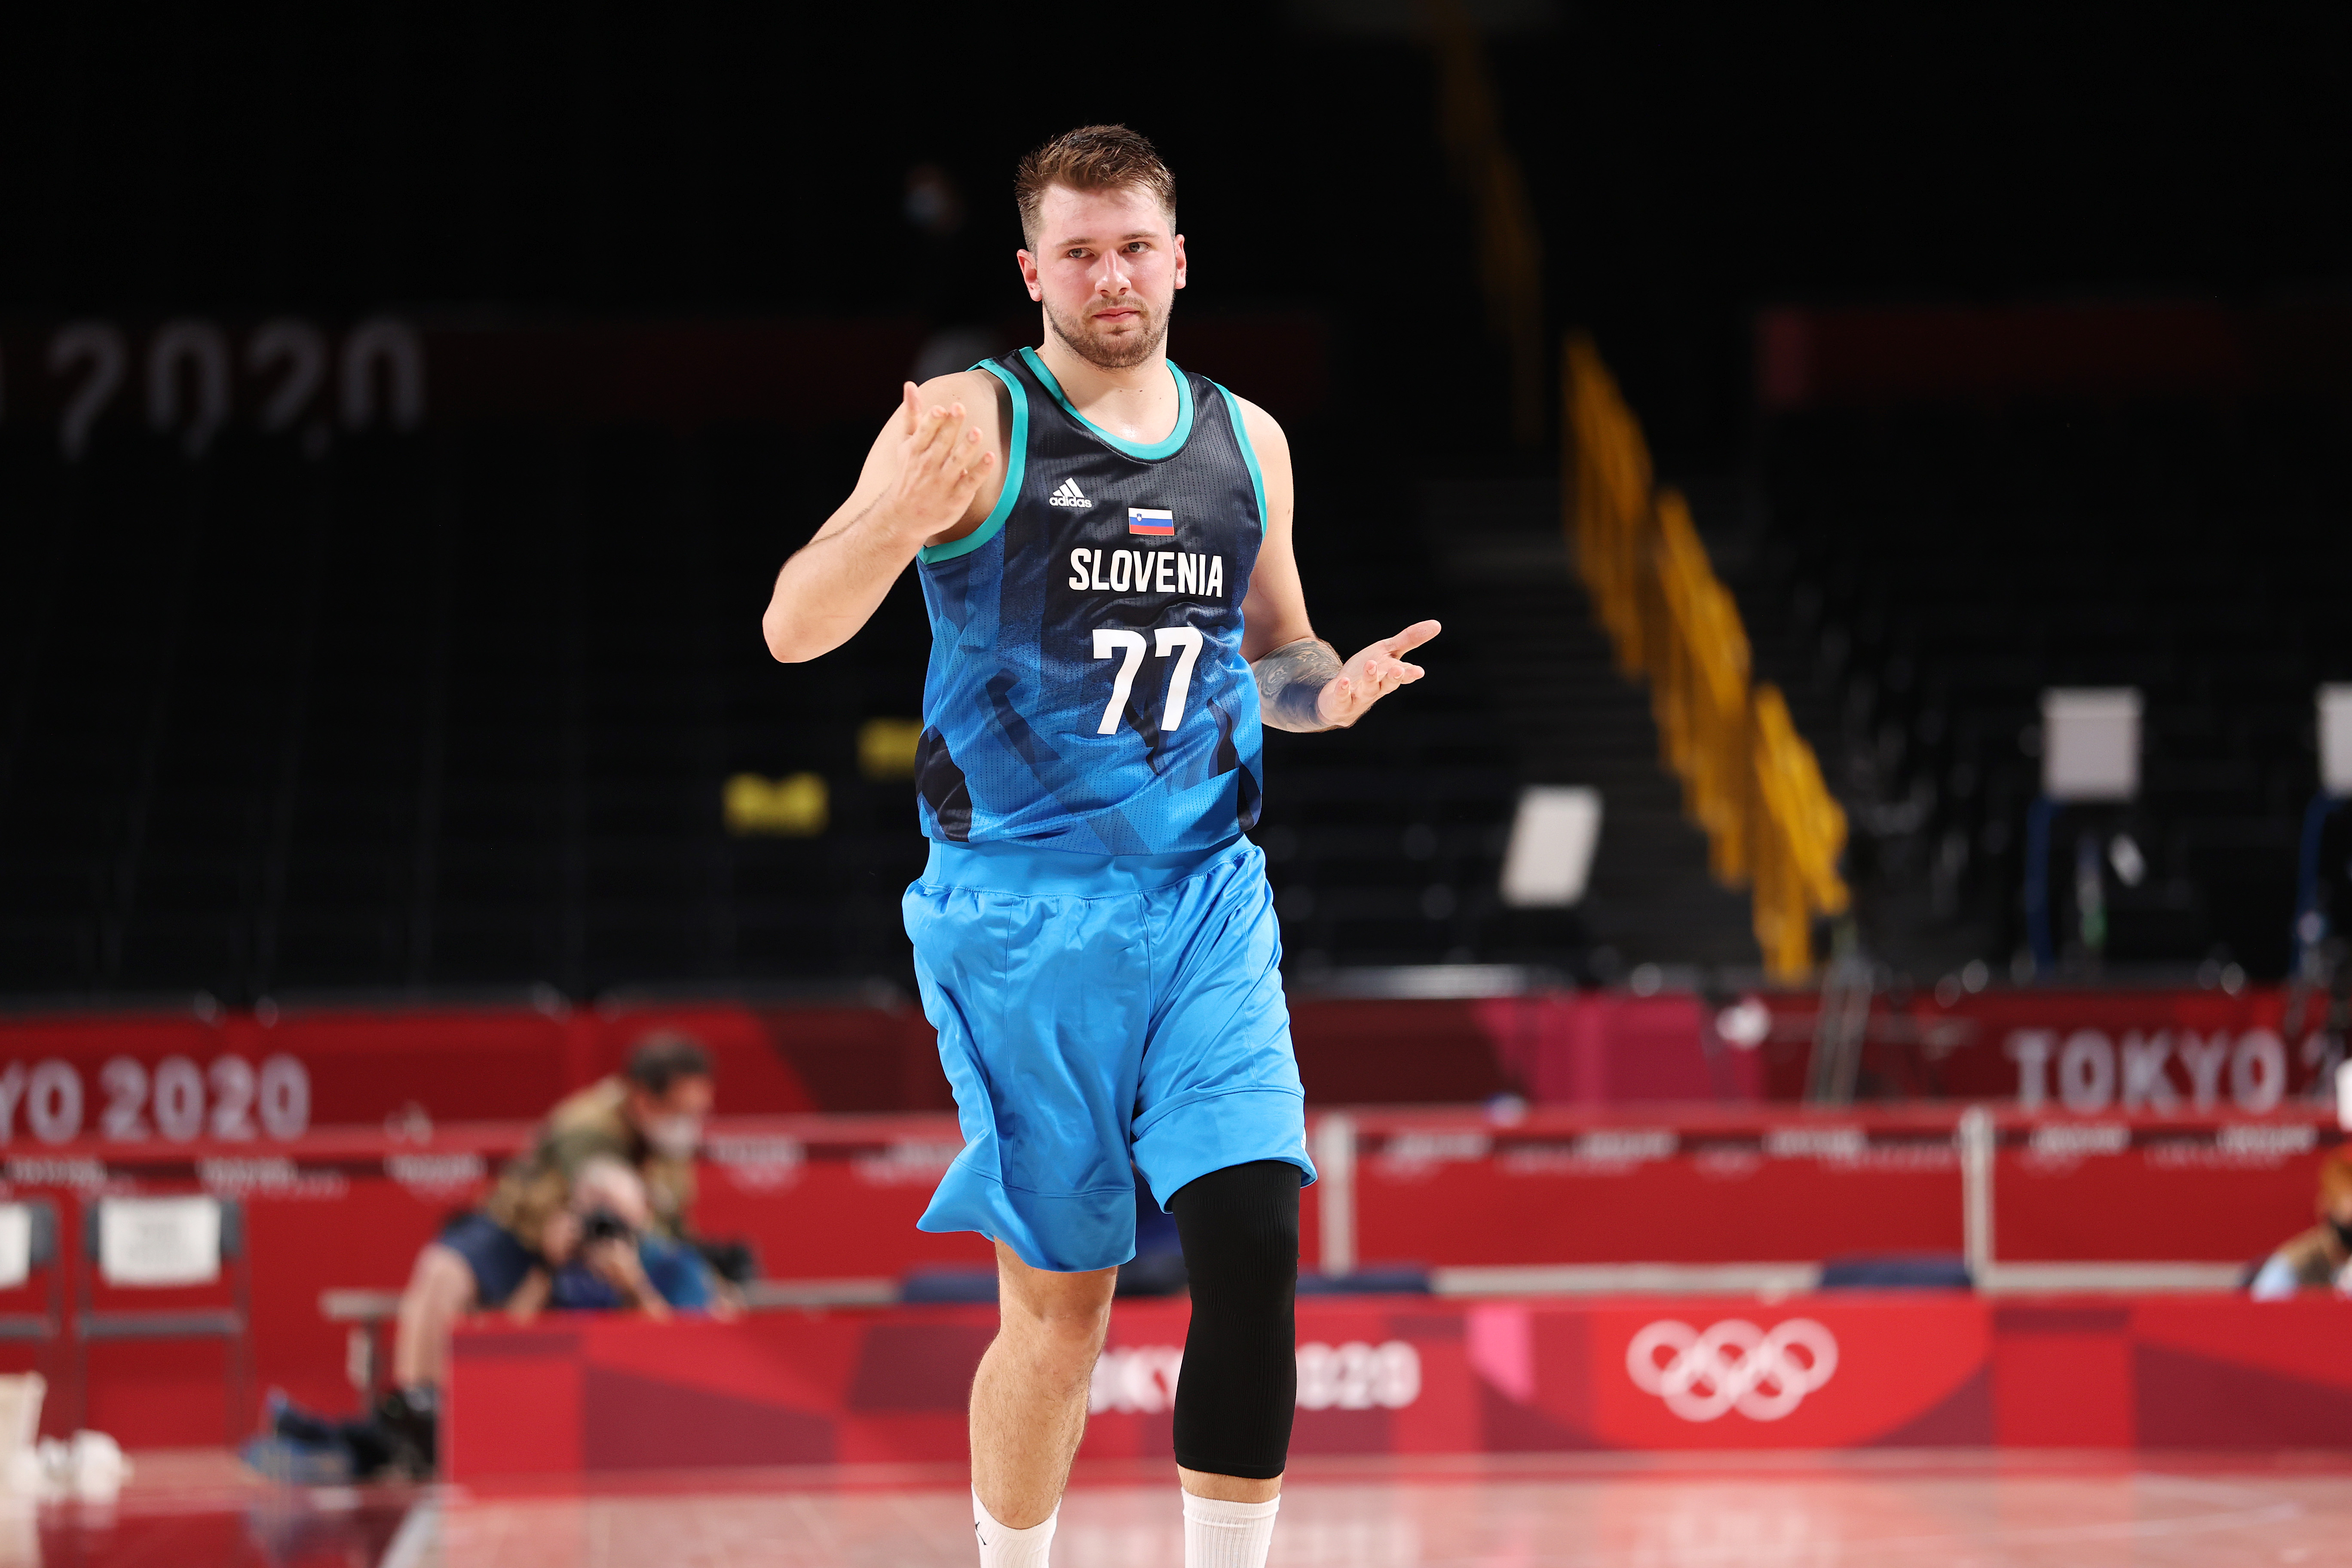 Luka Doncic reacts during Slovenia's win over Argentina in the 2020 Tokyo Olympics